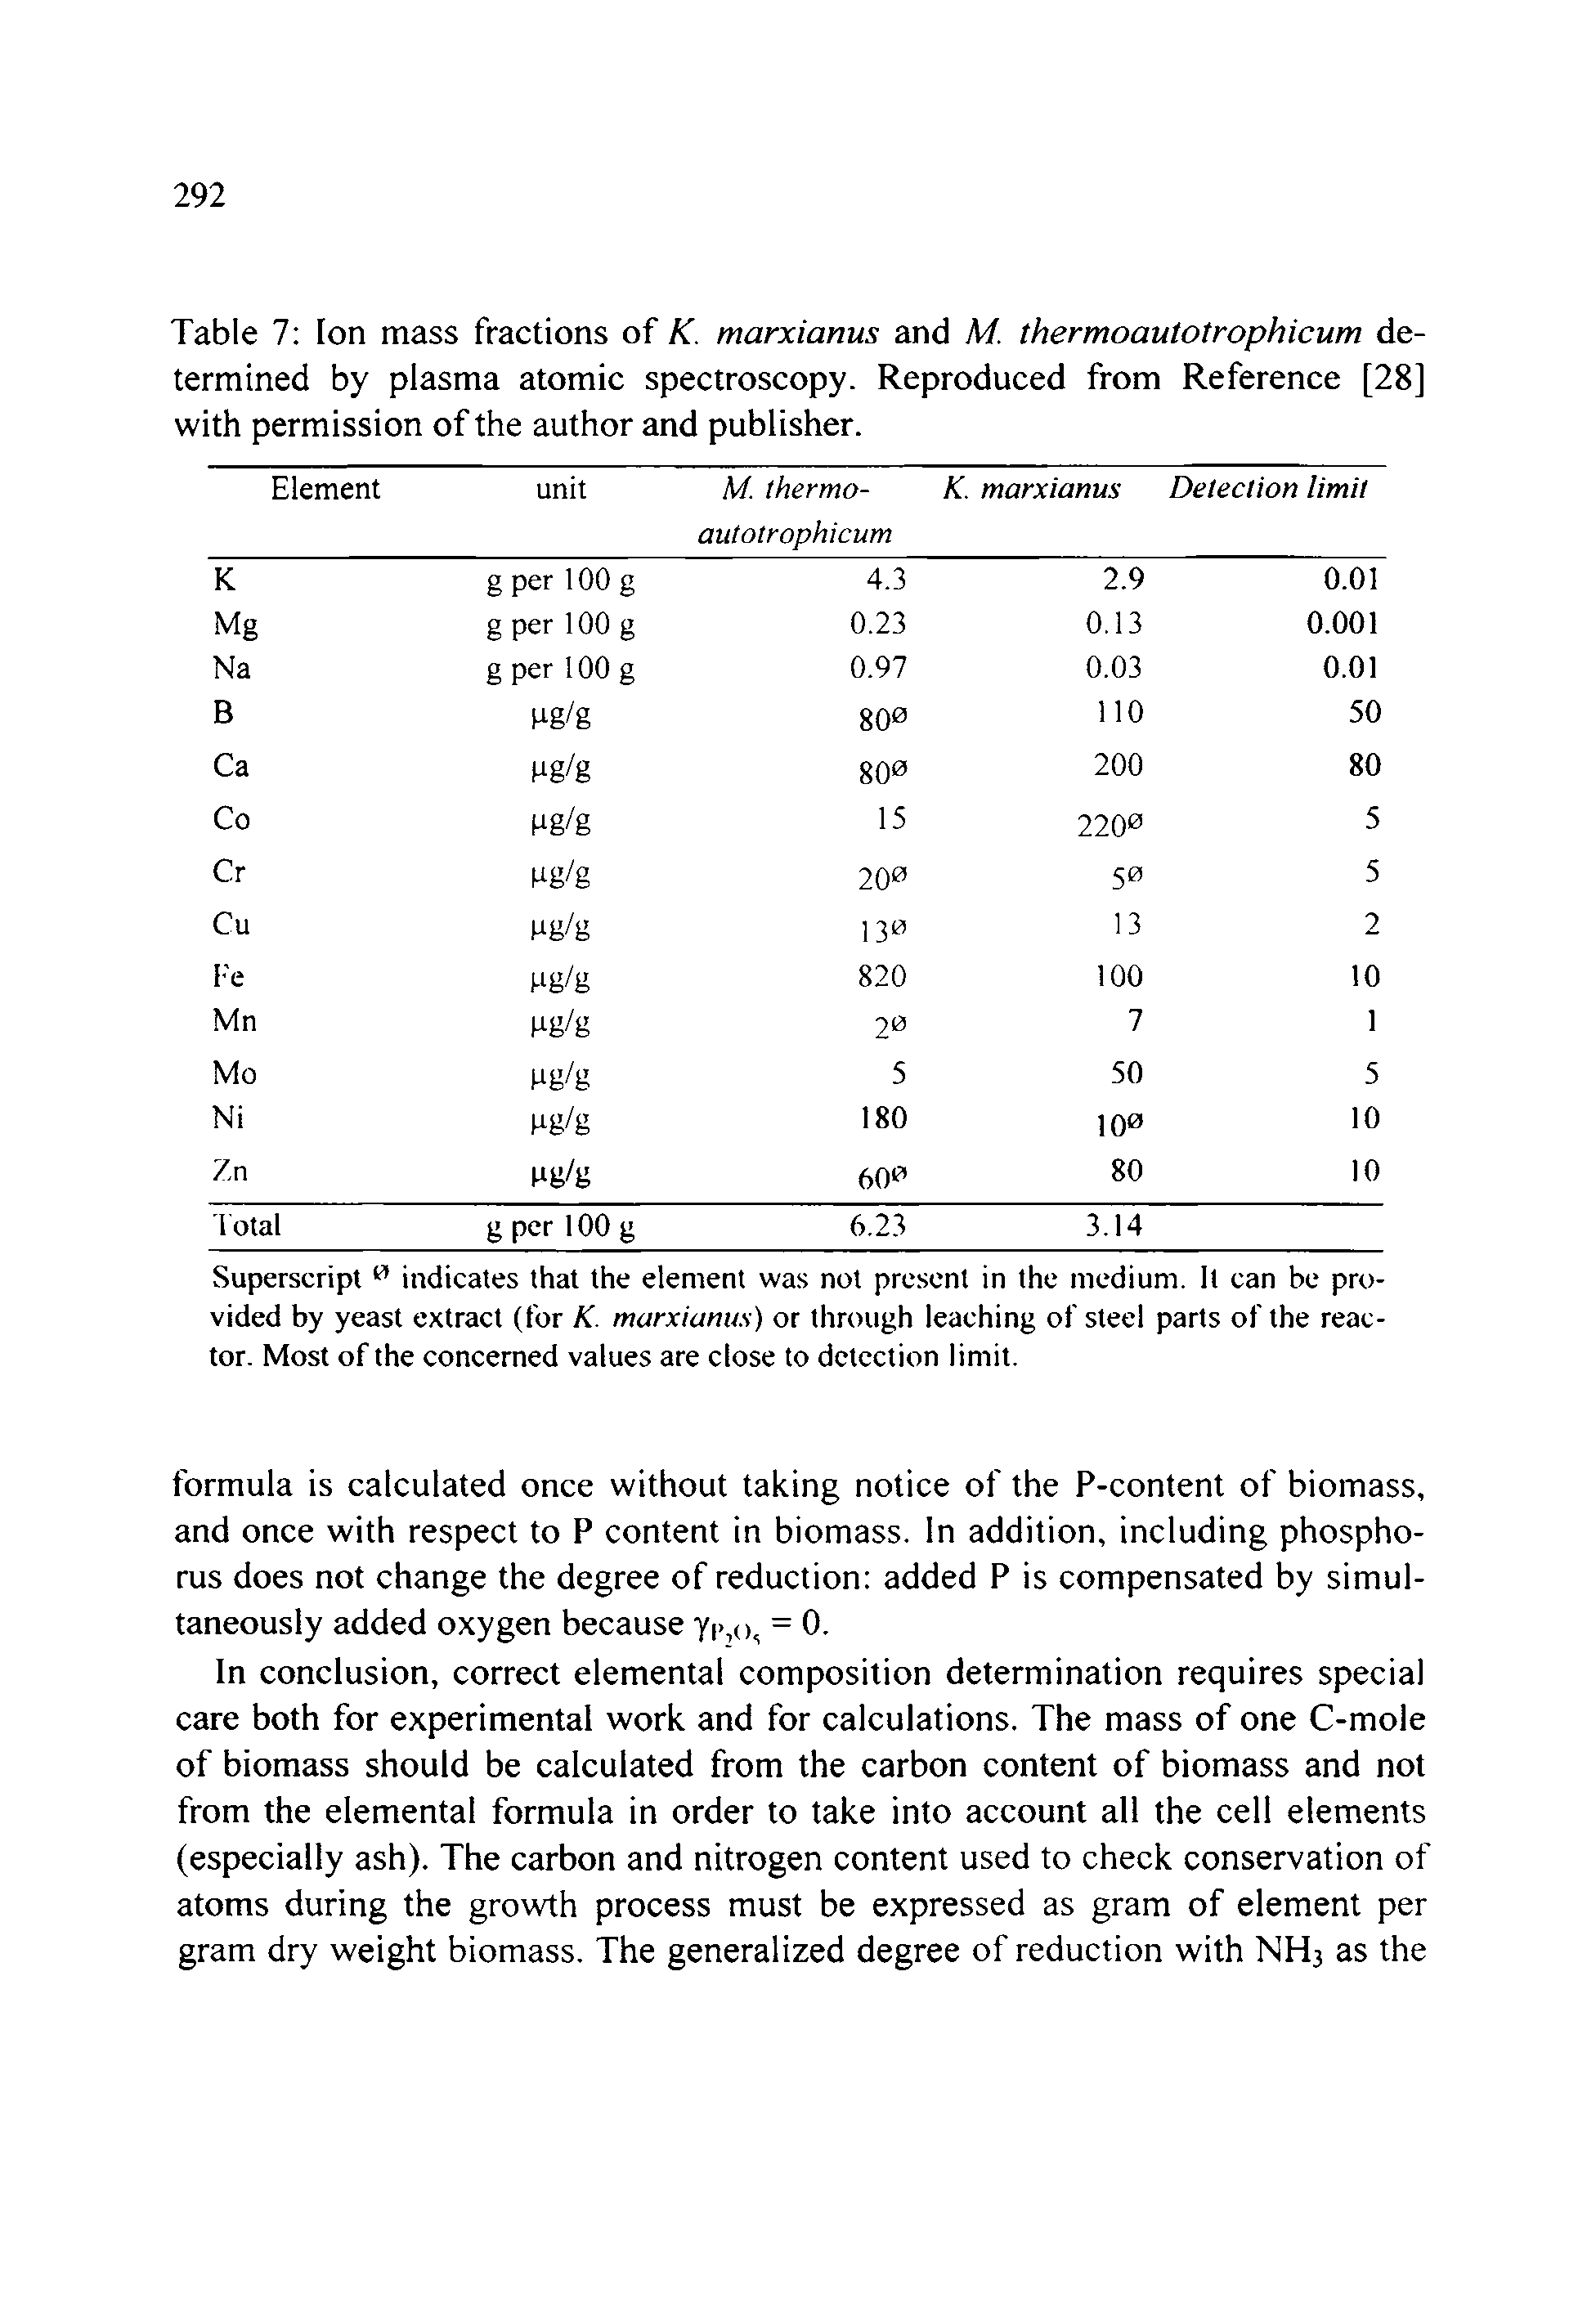 Table 7 Ion mass fractions of K. marxianus and M thermoautotrophicum determined by plasma atomic spectroscopy. Reproduced from Reference [28] with permission of the author and publisher.